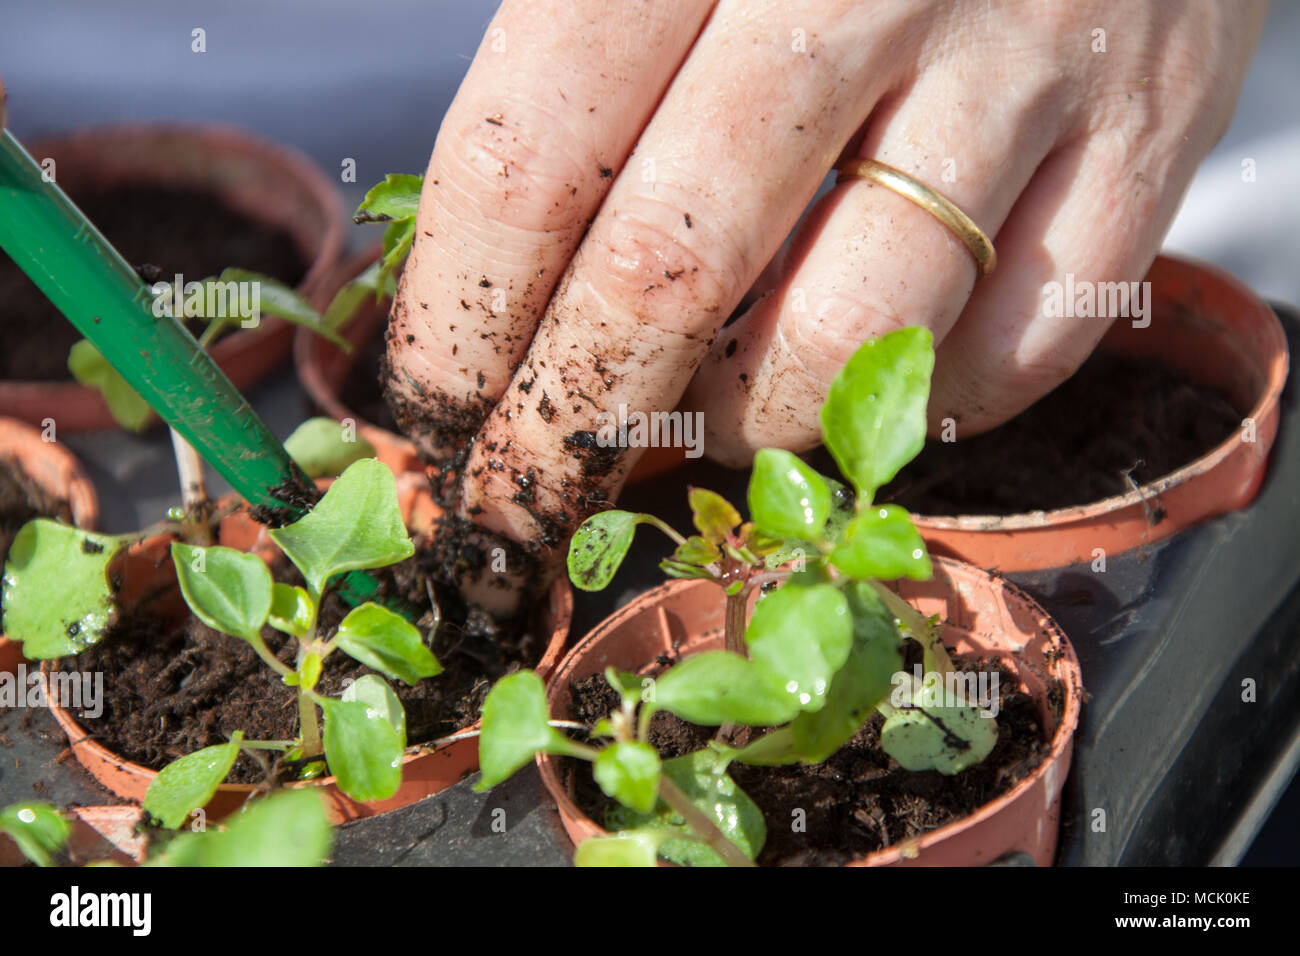 Picturesque close up view of a gardener potting on a plug plant. The plants in the image are Busy Lizzie Jigsaw. Stock Photo